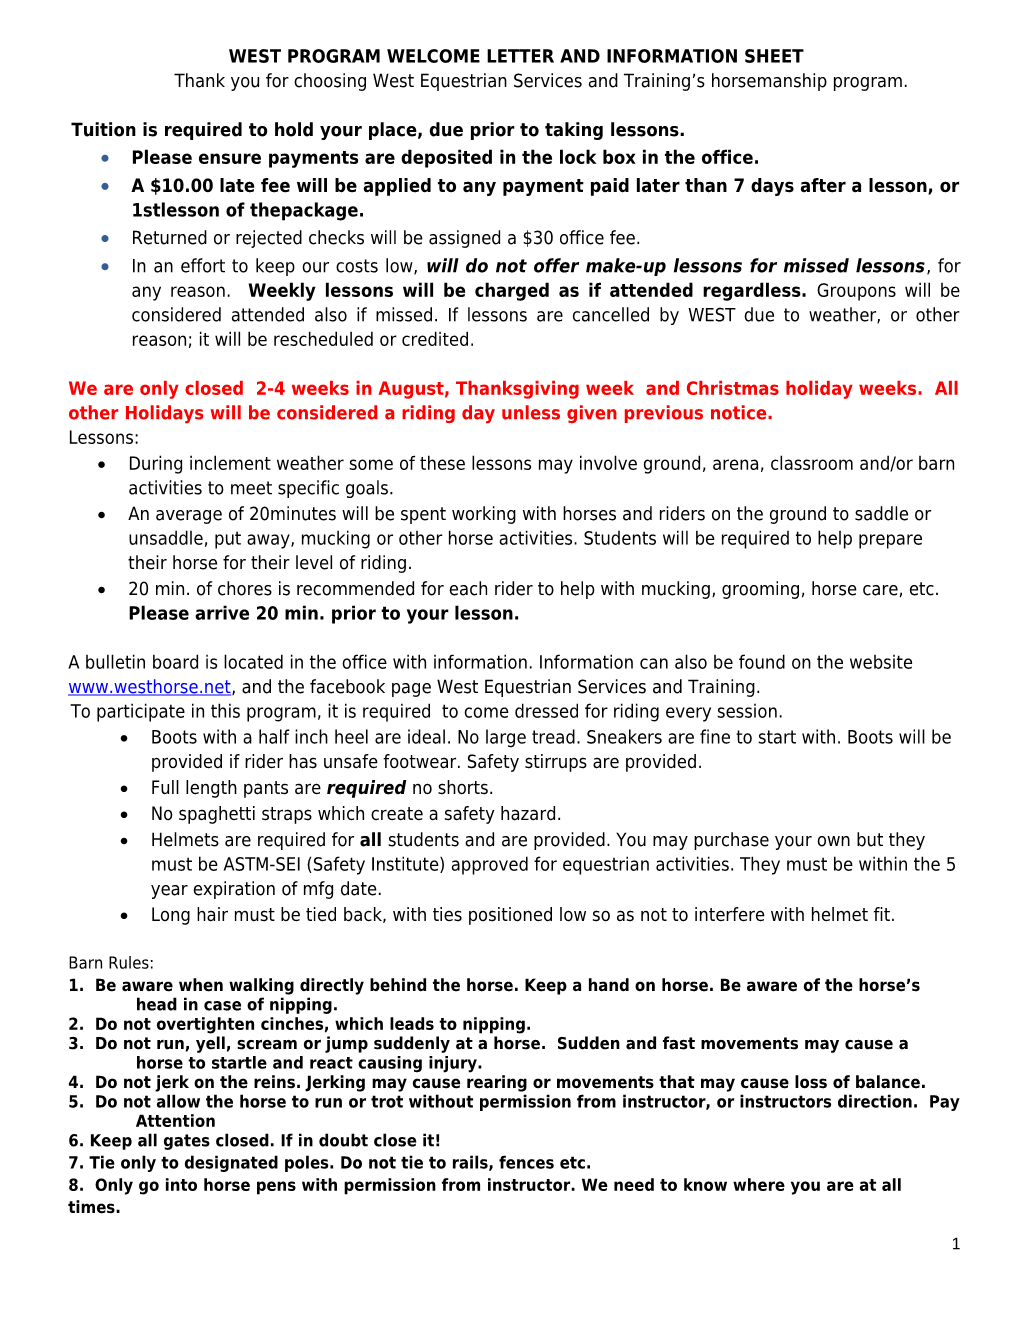 West Program Welcome Letter and Information Sheet